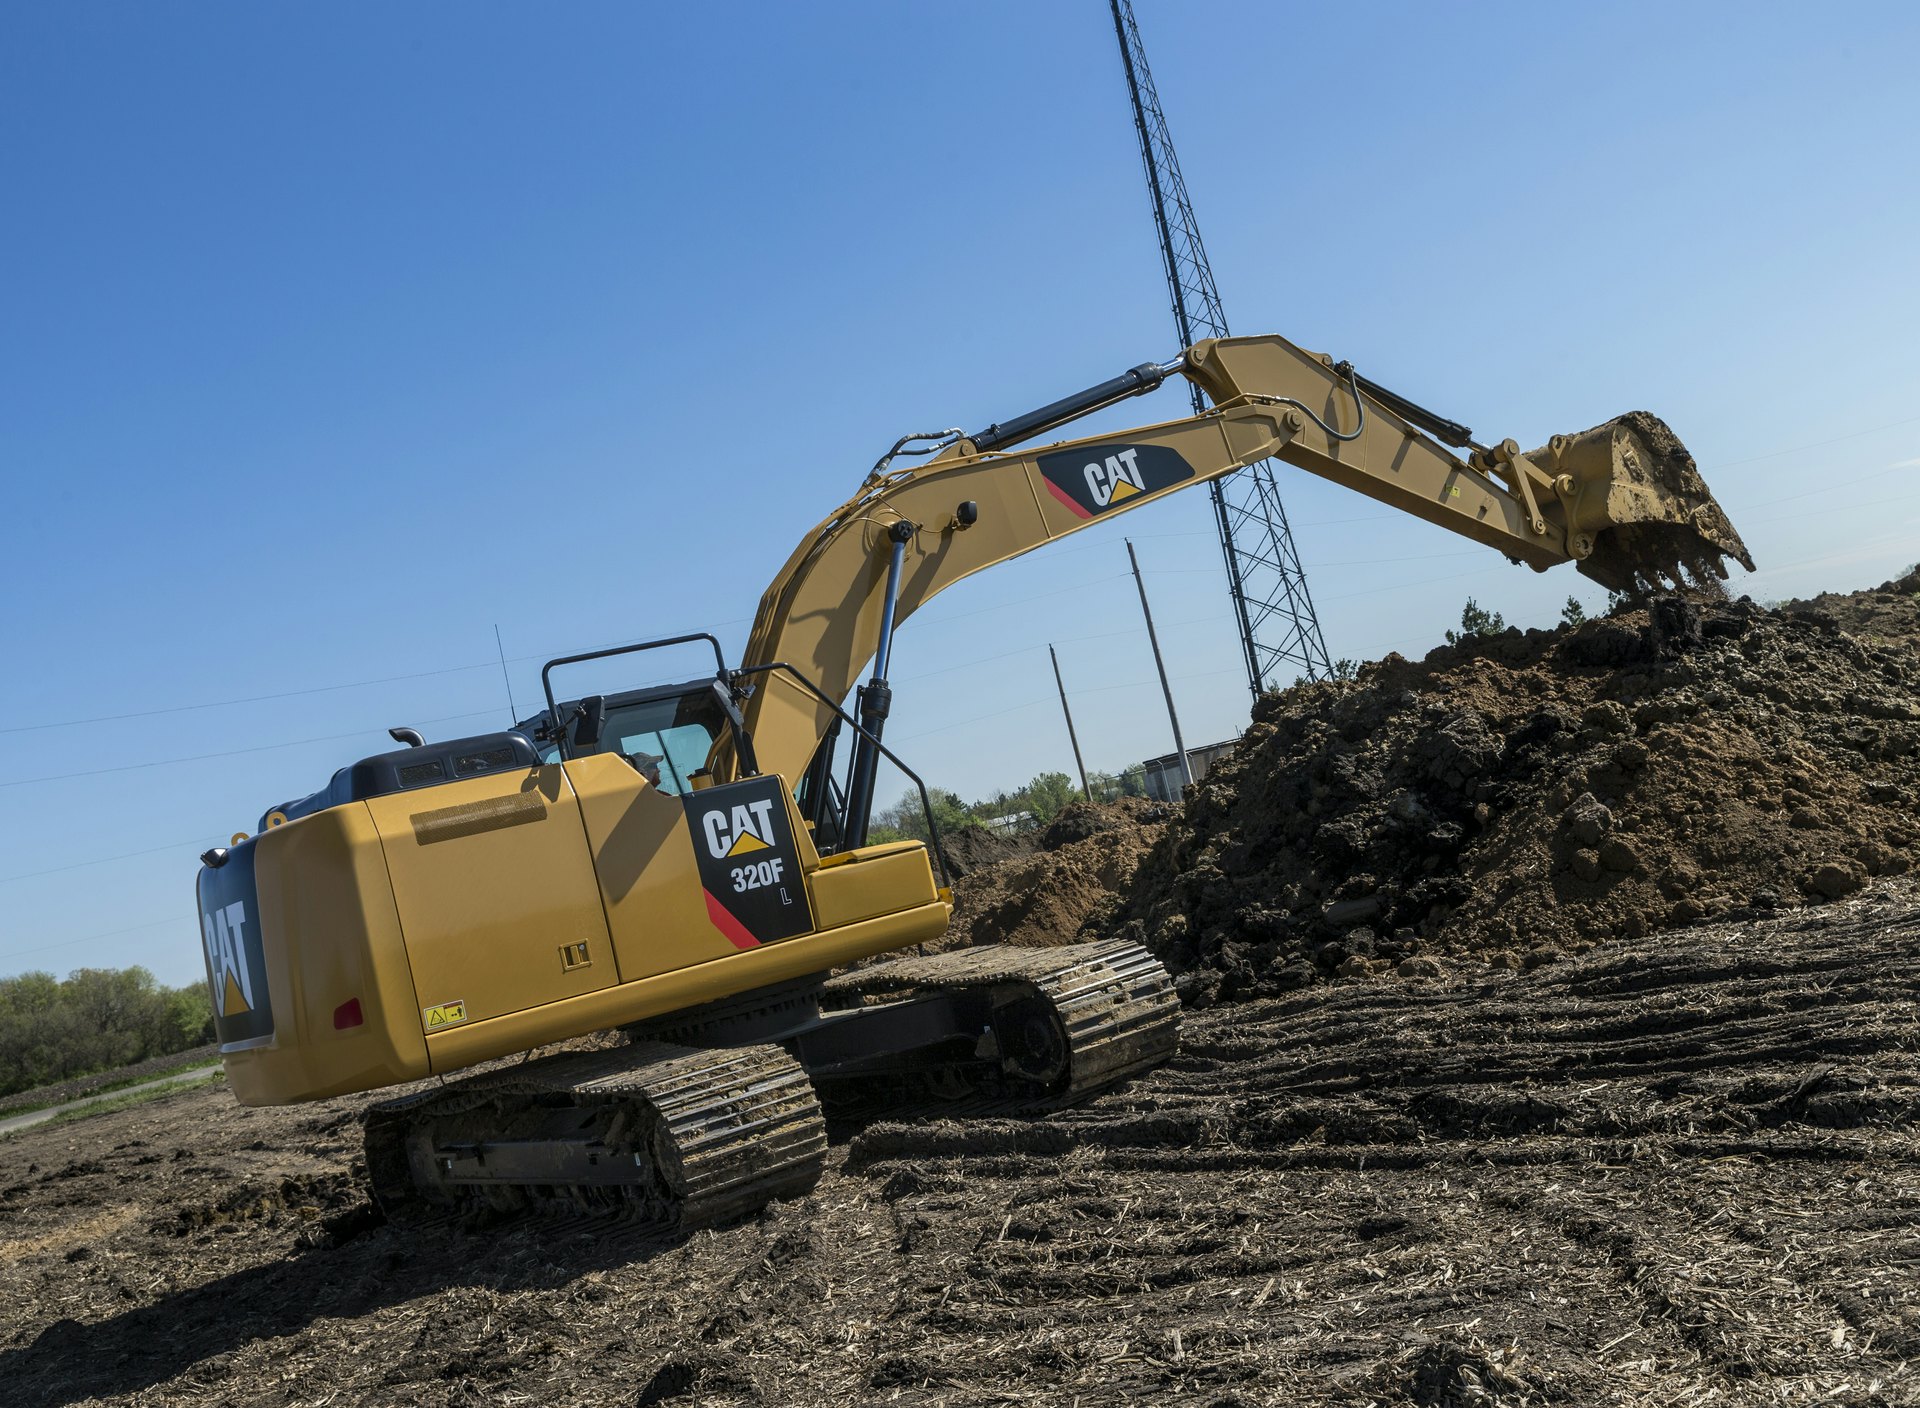 New Cat 320F hydraulic excavator features 8.5% reduced fuel